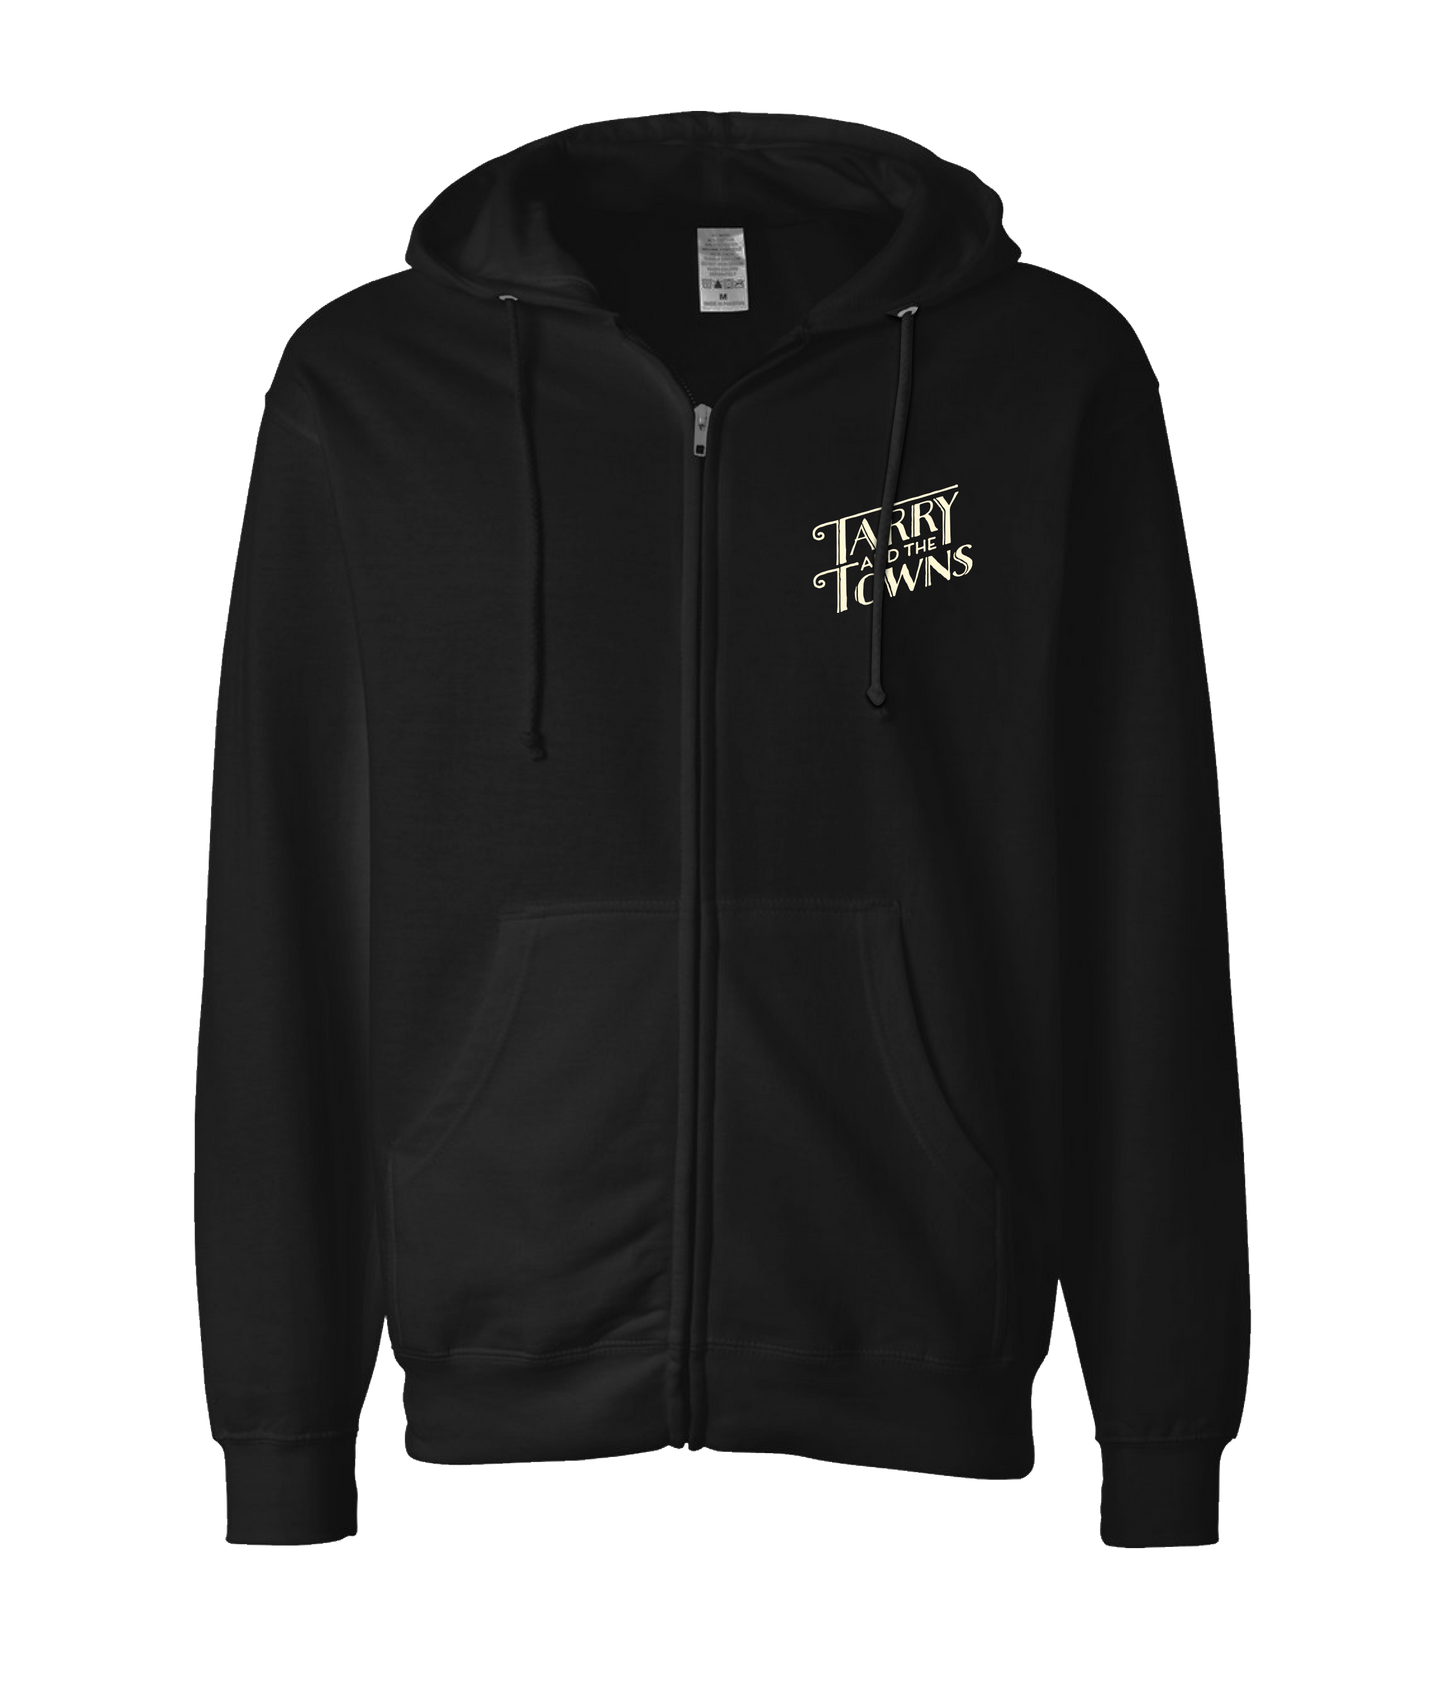 Tarry and the Towns - Logo - Black Zip Up Hoodie